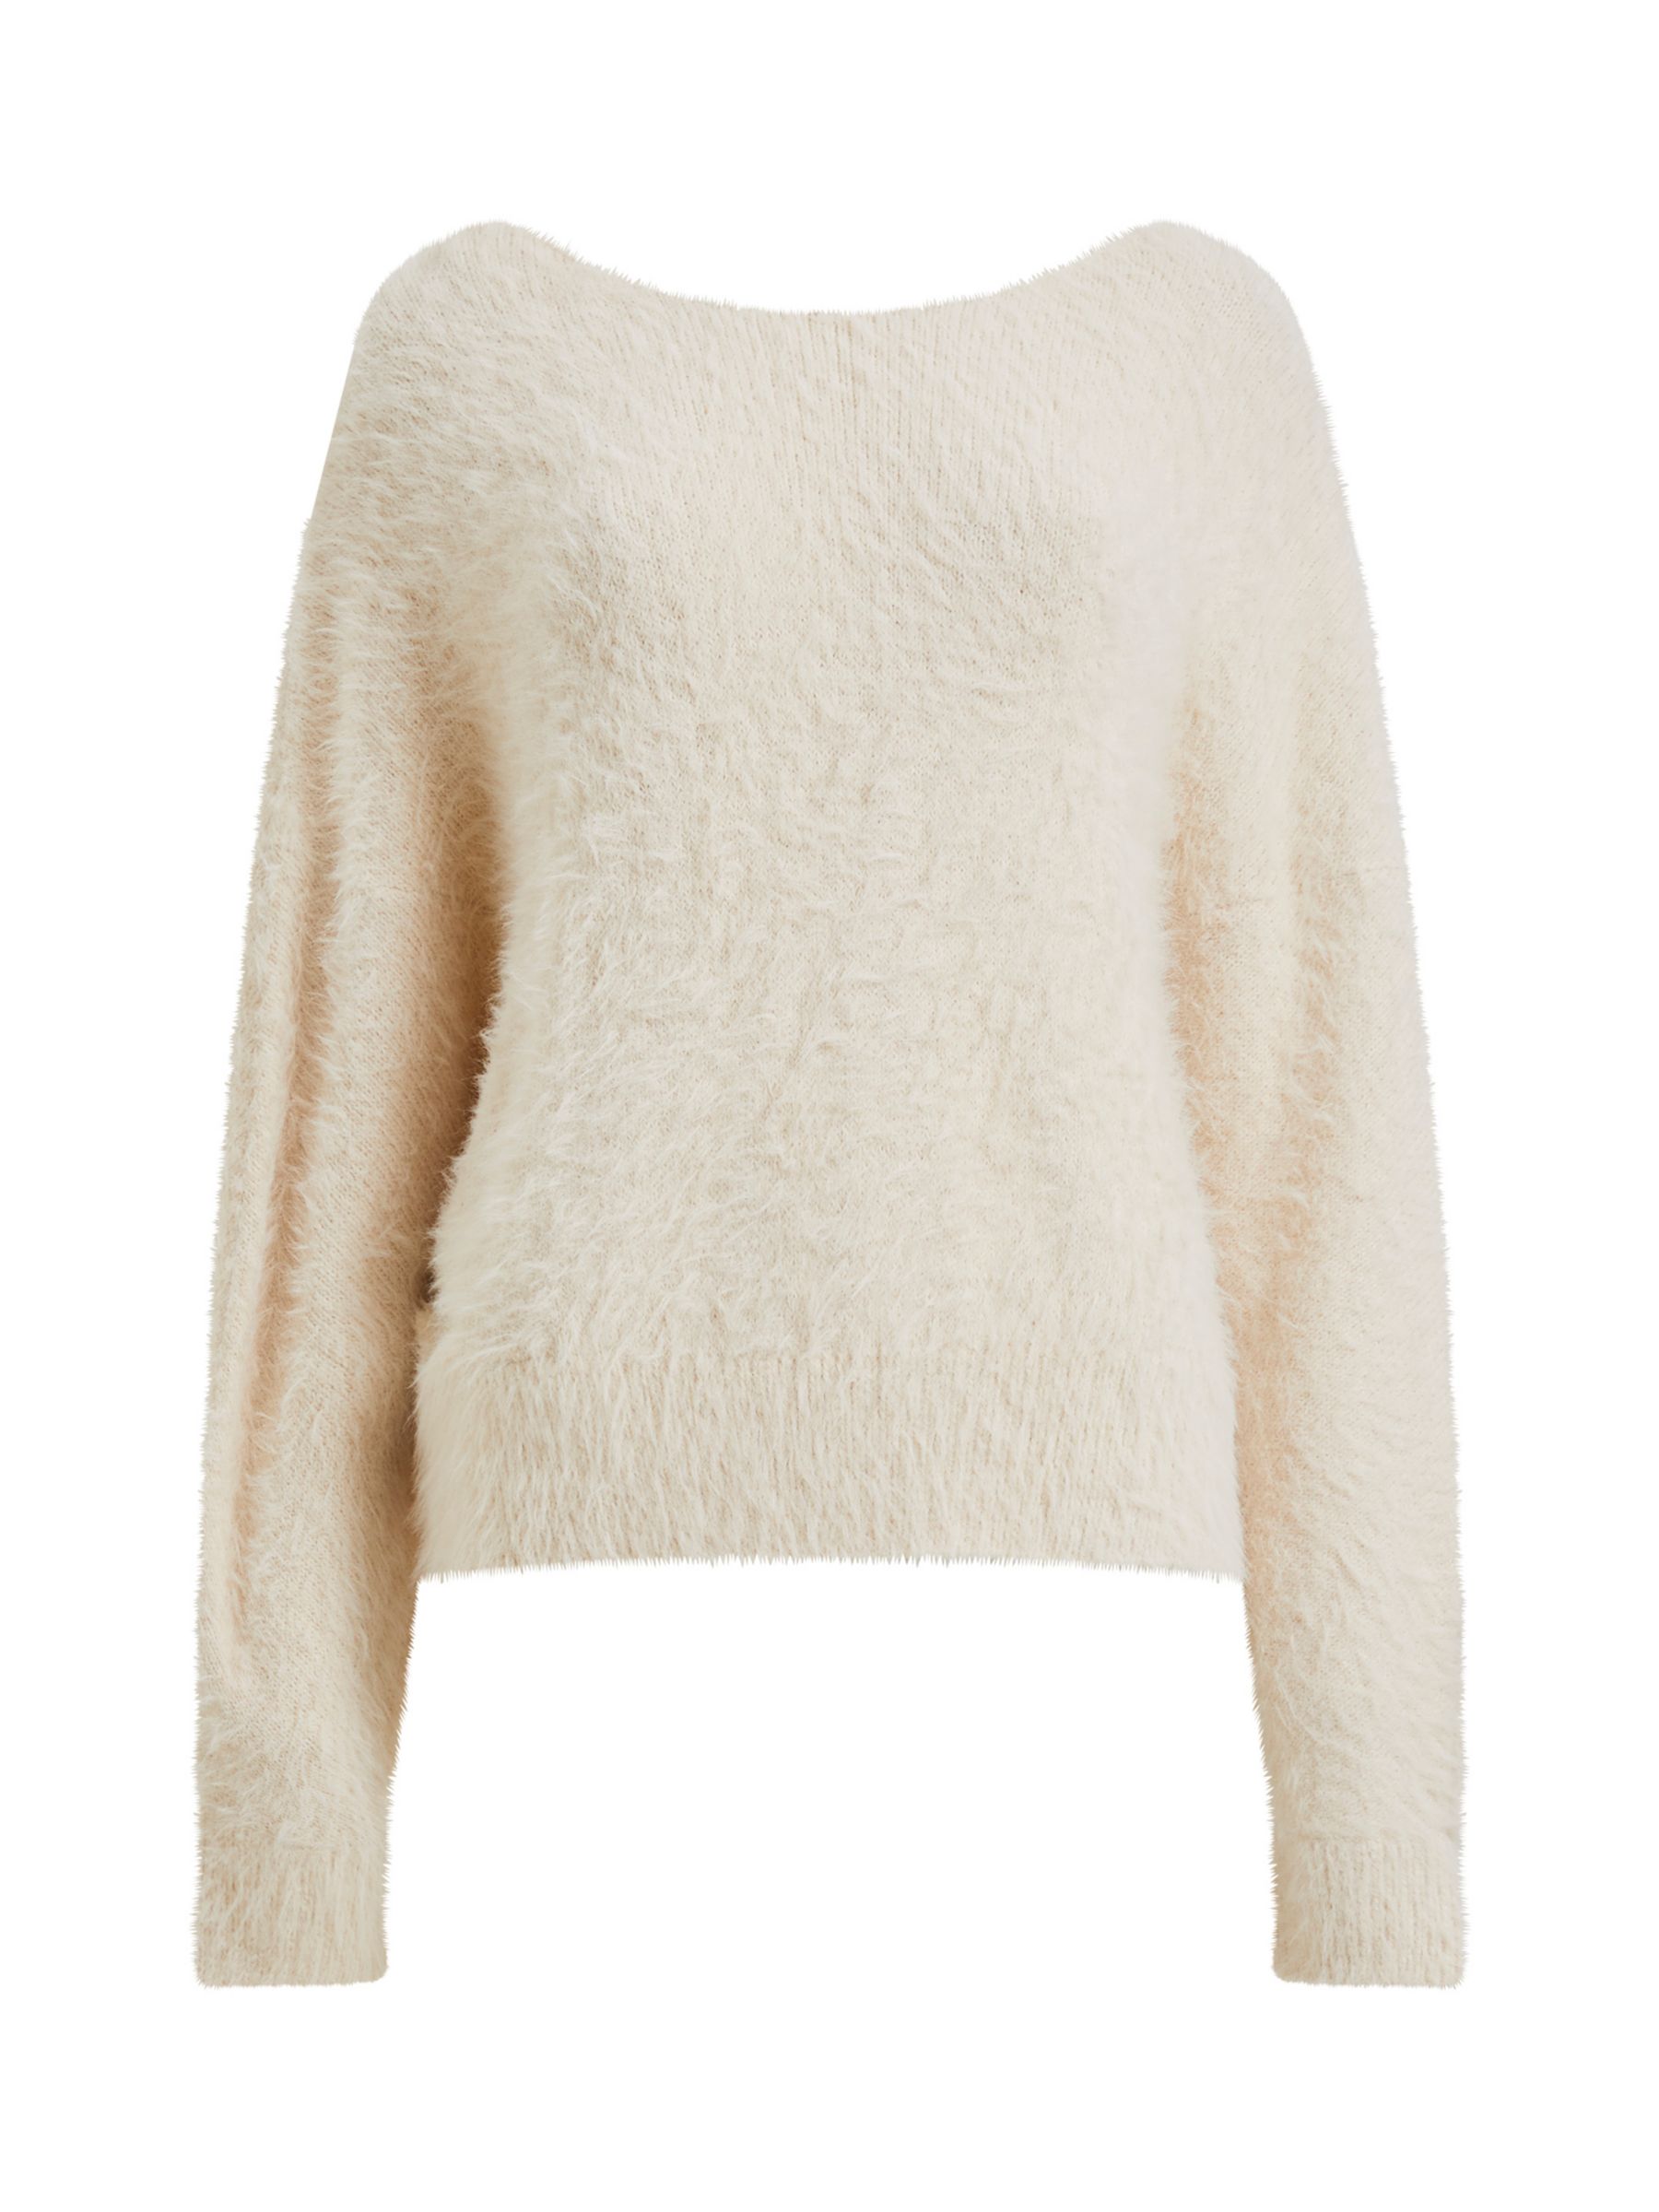 Buy French Connection Meena Fluffy Jumper, Classic Cream Online at johnlewis.com